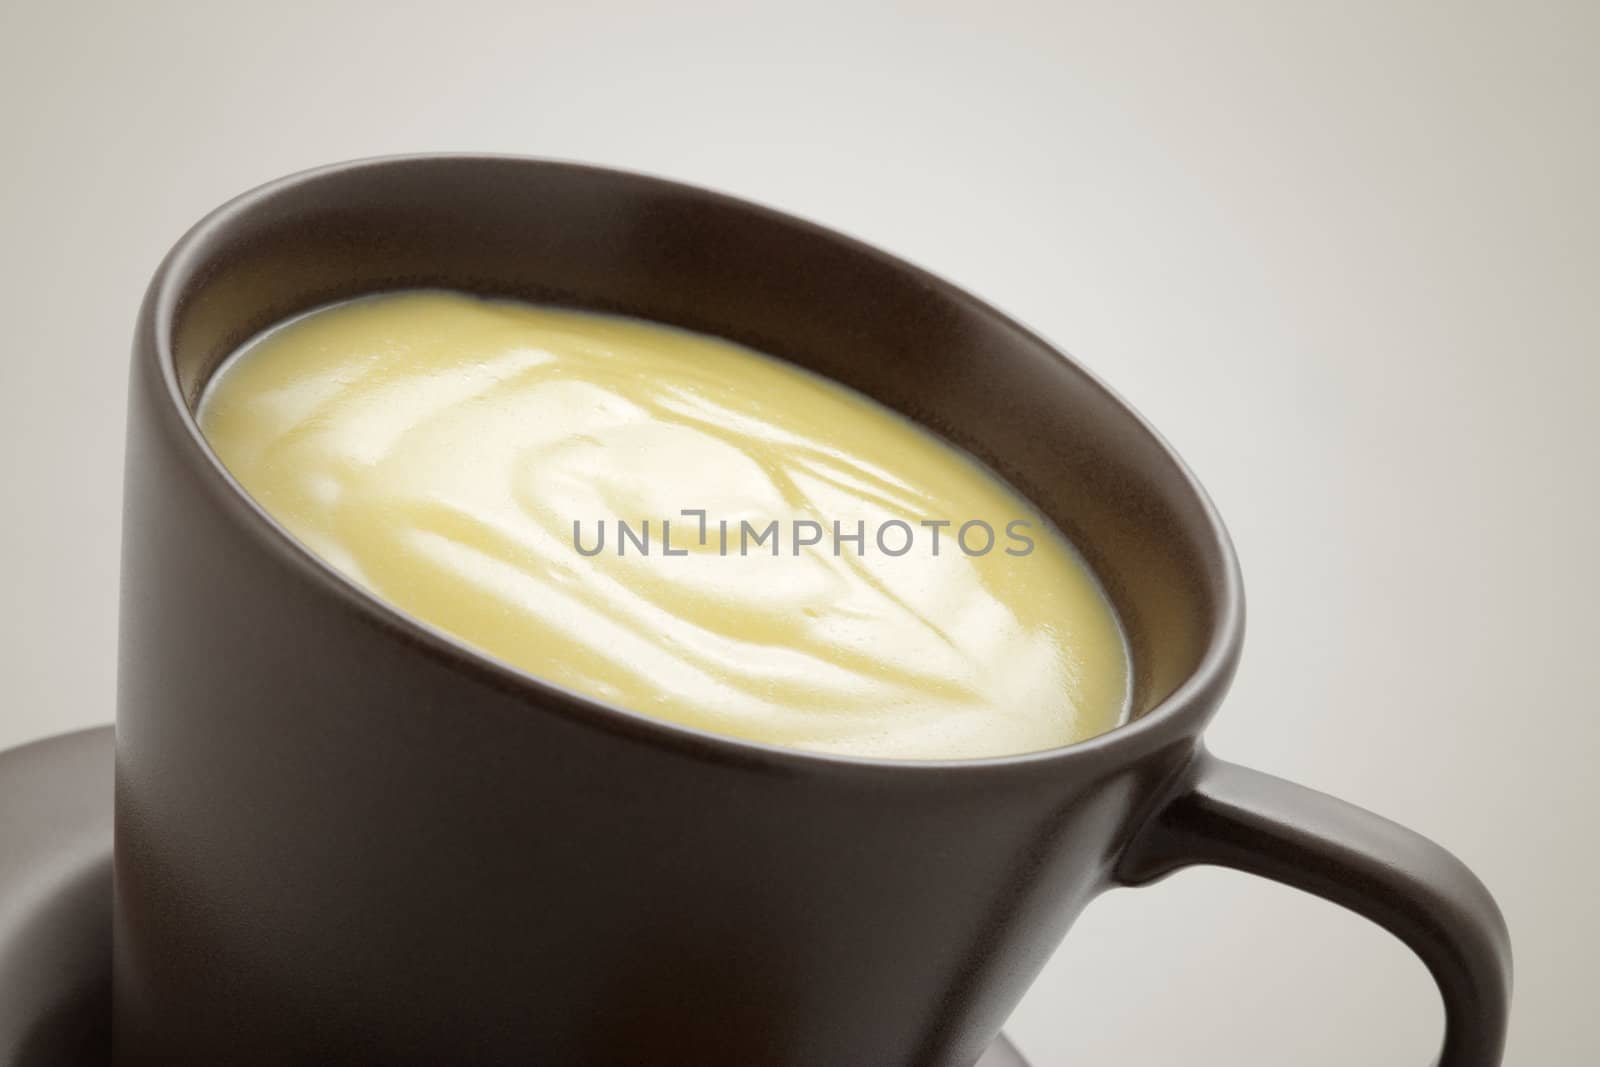 Cup of white chocolate, close up